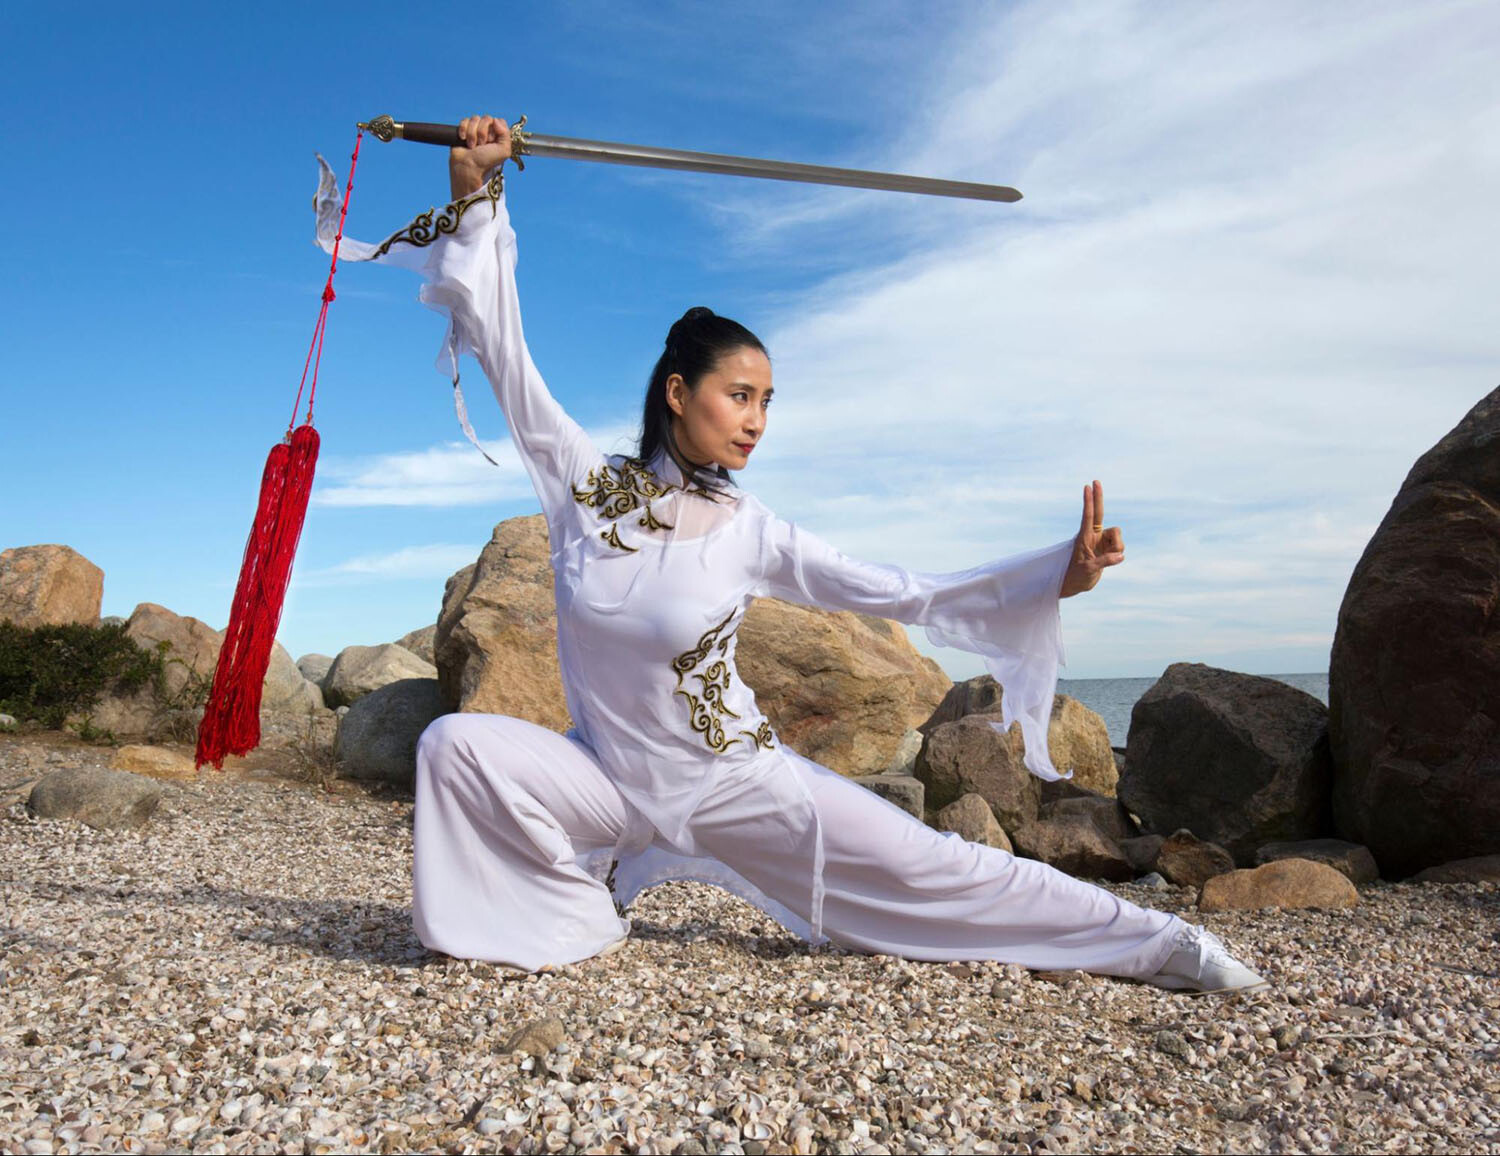 https://www.outfit4events.cz/images/palette/shared/www/multimedia/images/tai-chi-04.2889051177.1696348331.jpg